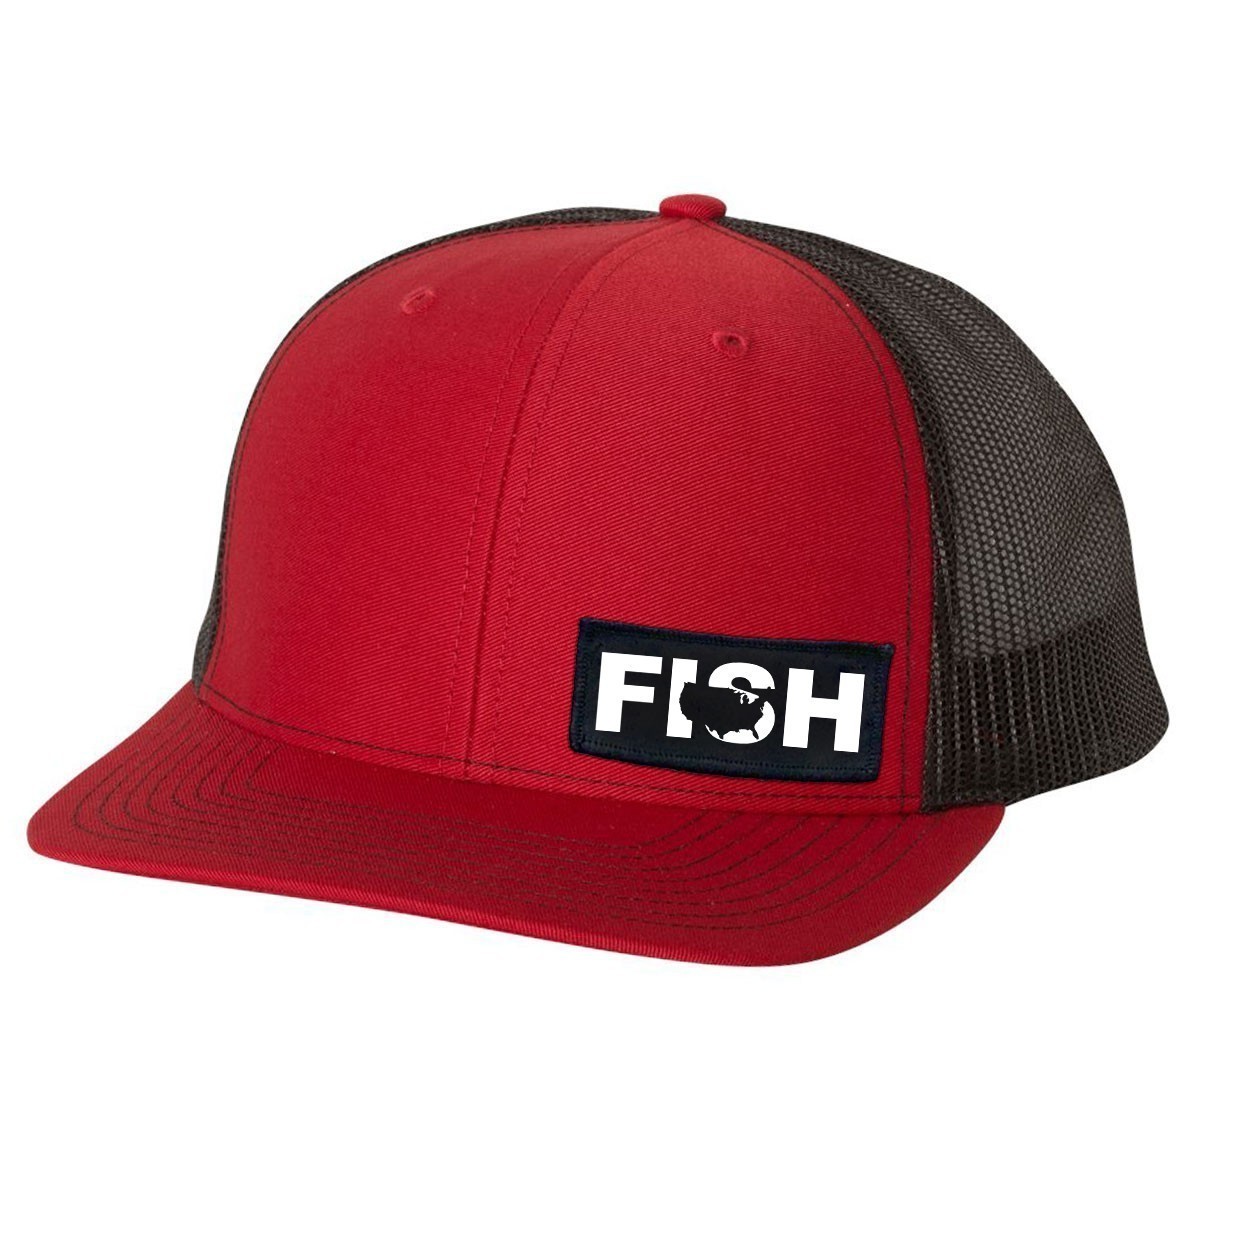 Fish United States Night Out Woven Patch Snapback Trucker Hat Red/Black (White Logo)